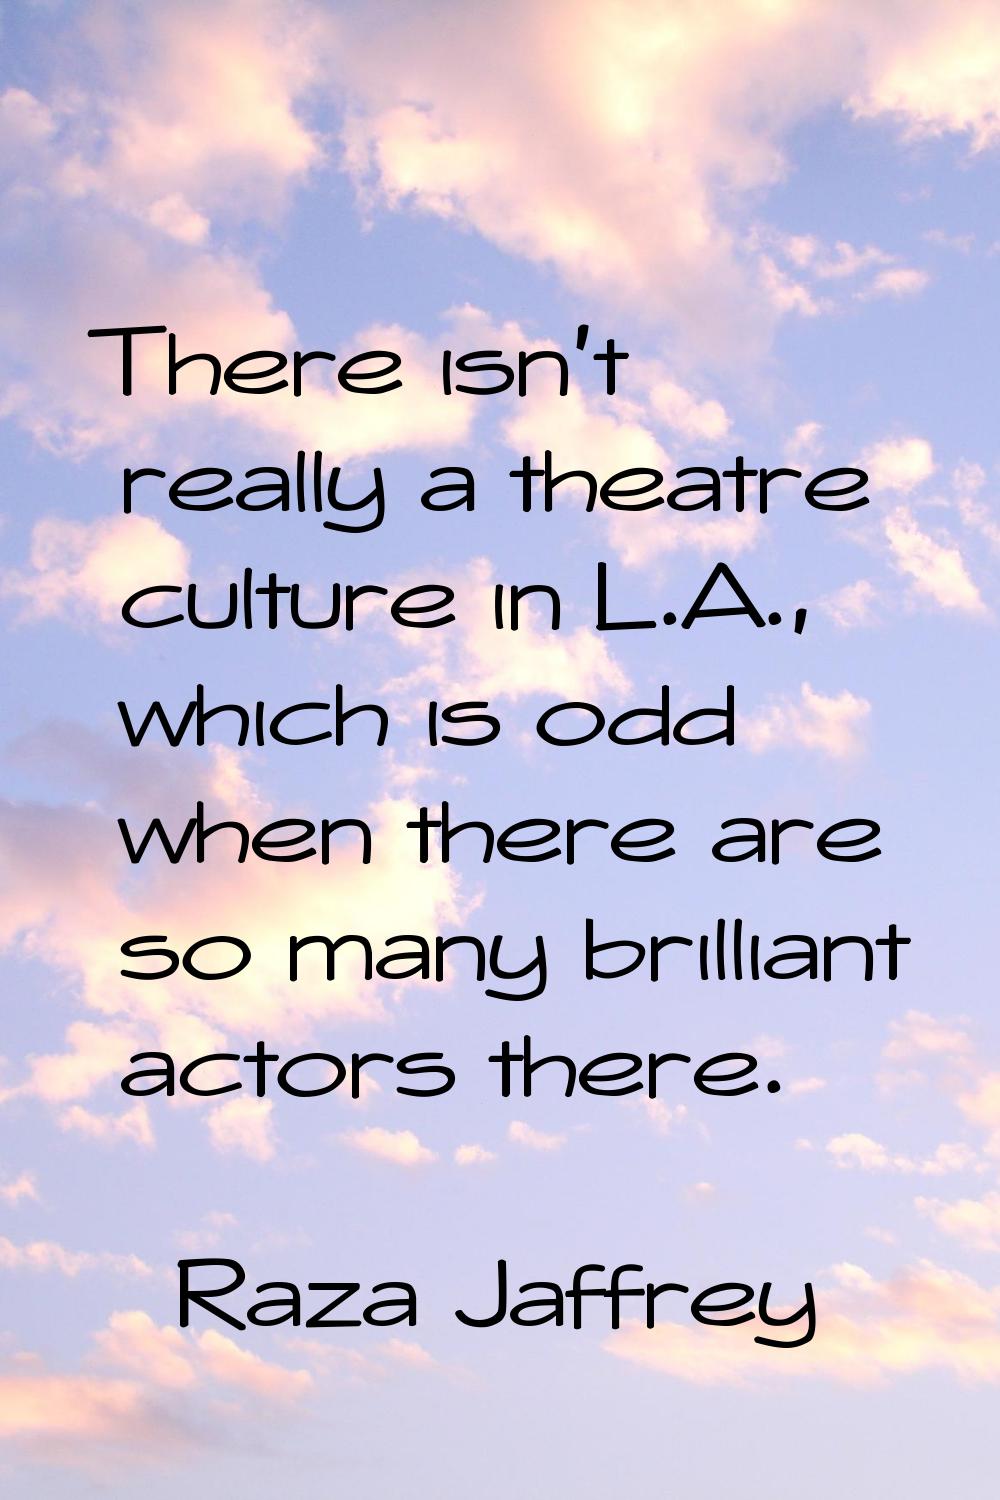 There isn't really a theatre culture in L.A., which is odd when there are so many brilliant actors 